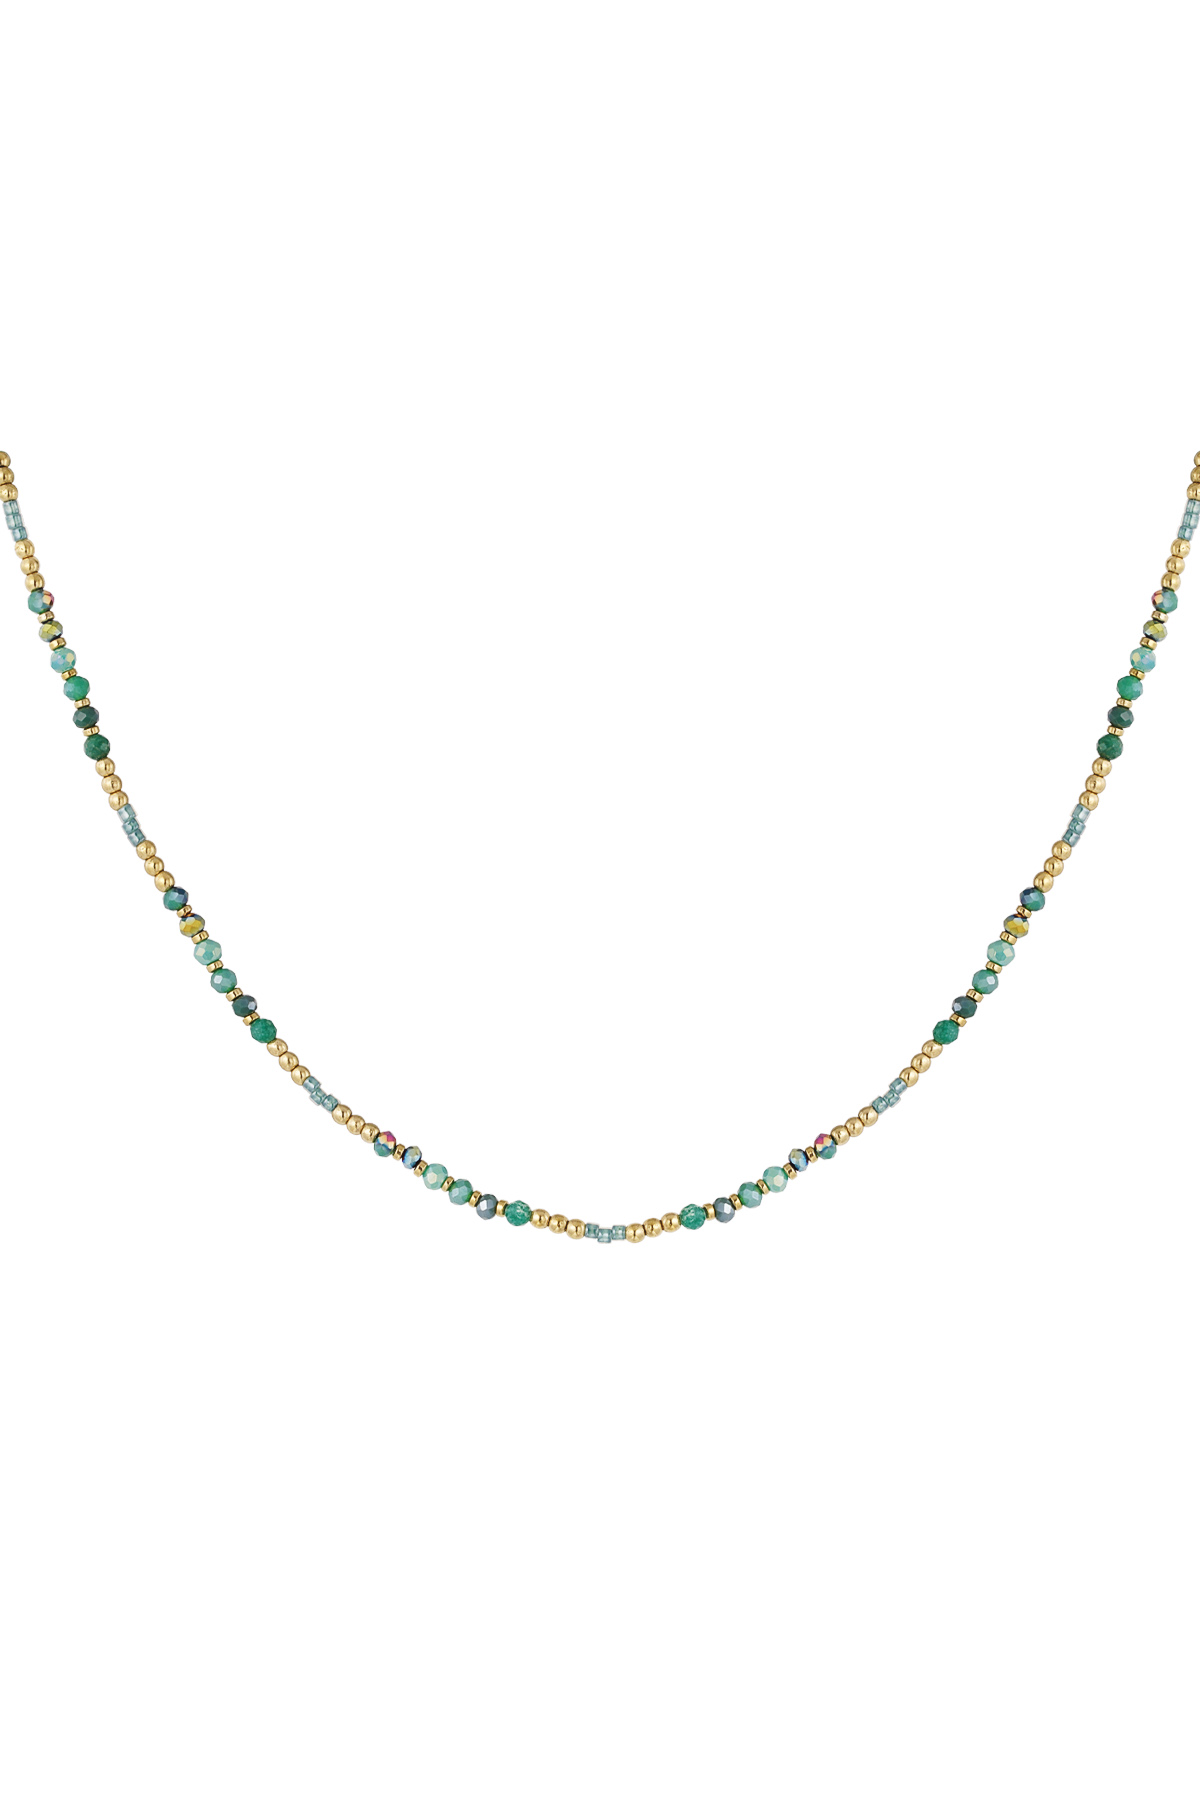 Bead necklace - green h5 